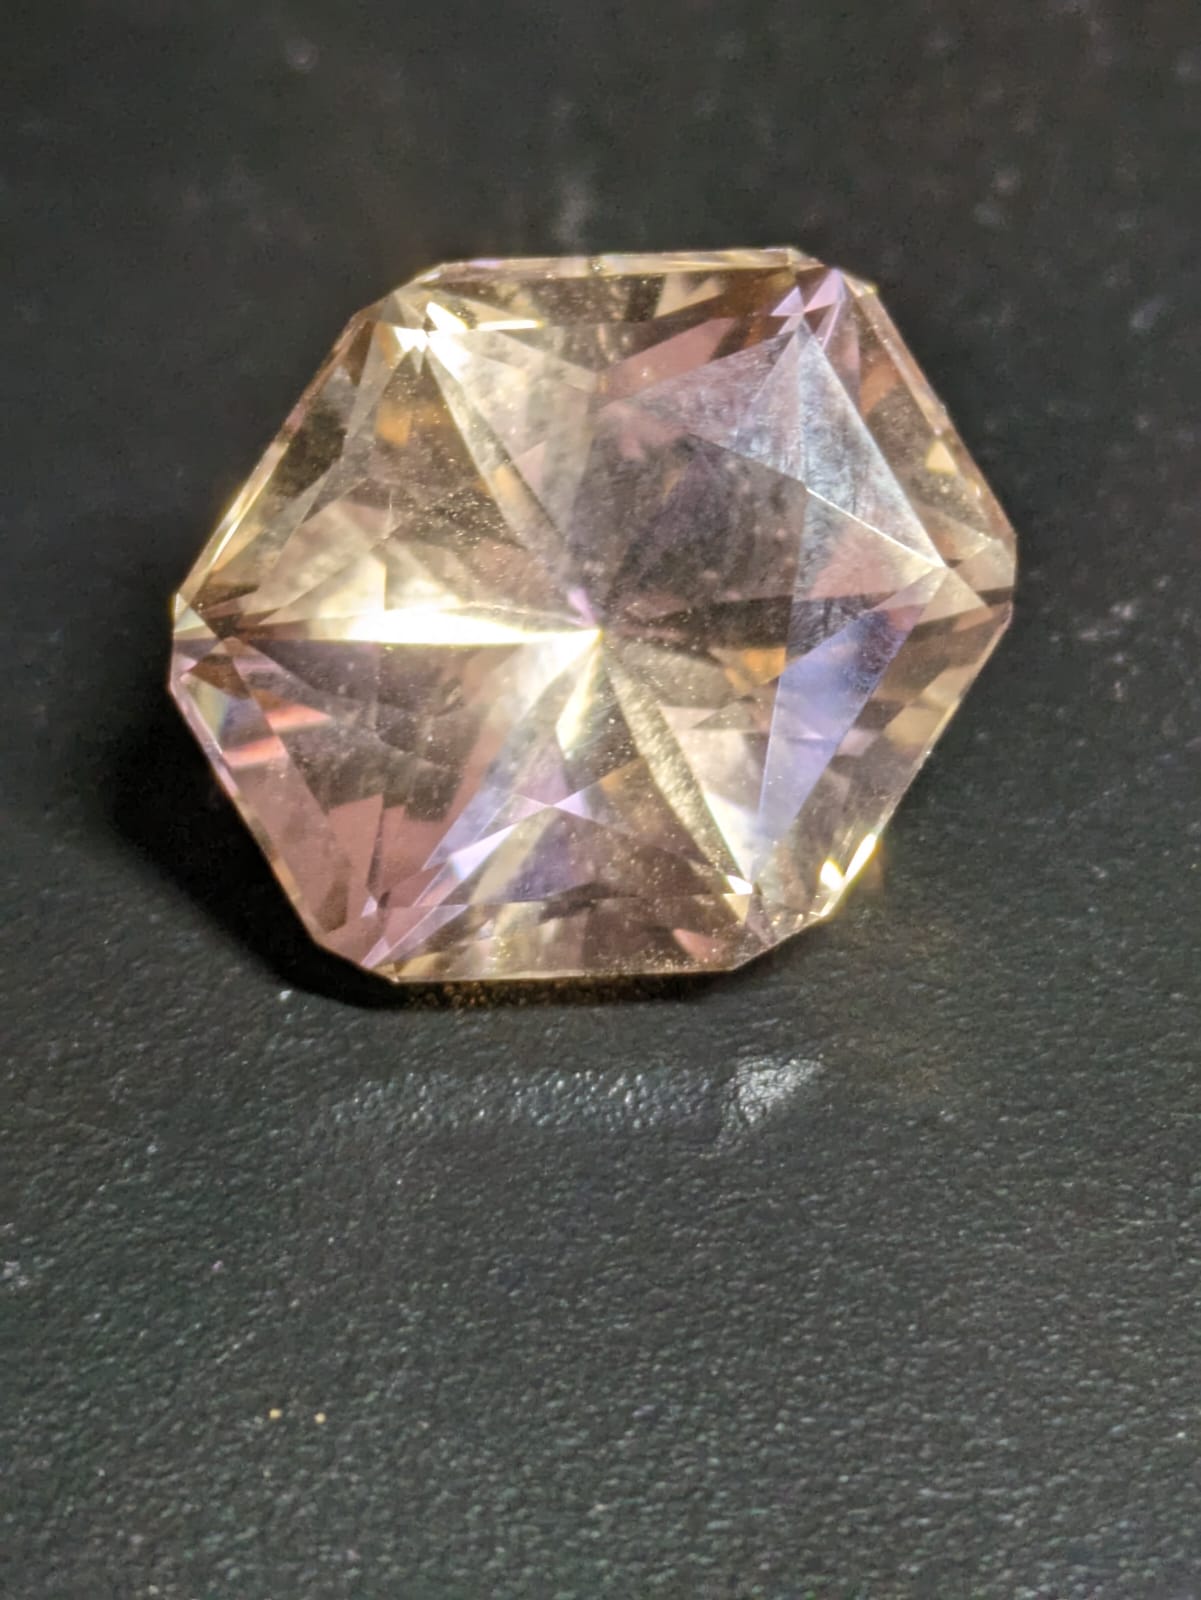 Imperial Topaz - Image 9 of 14